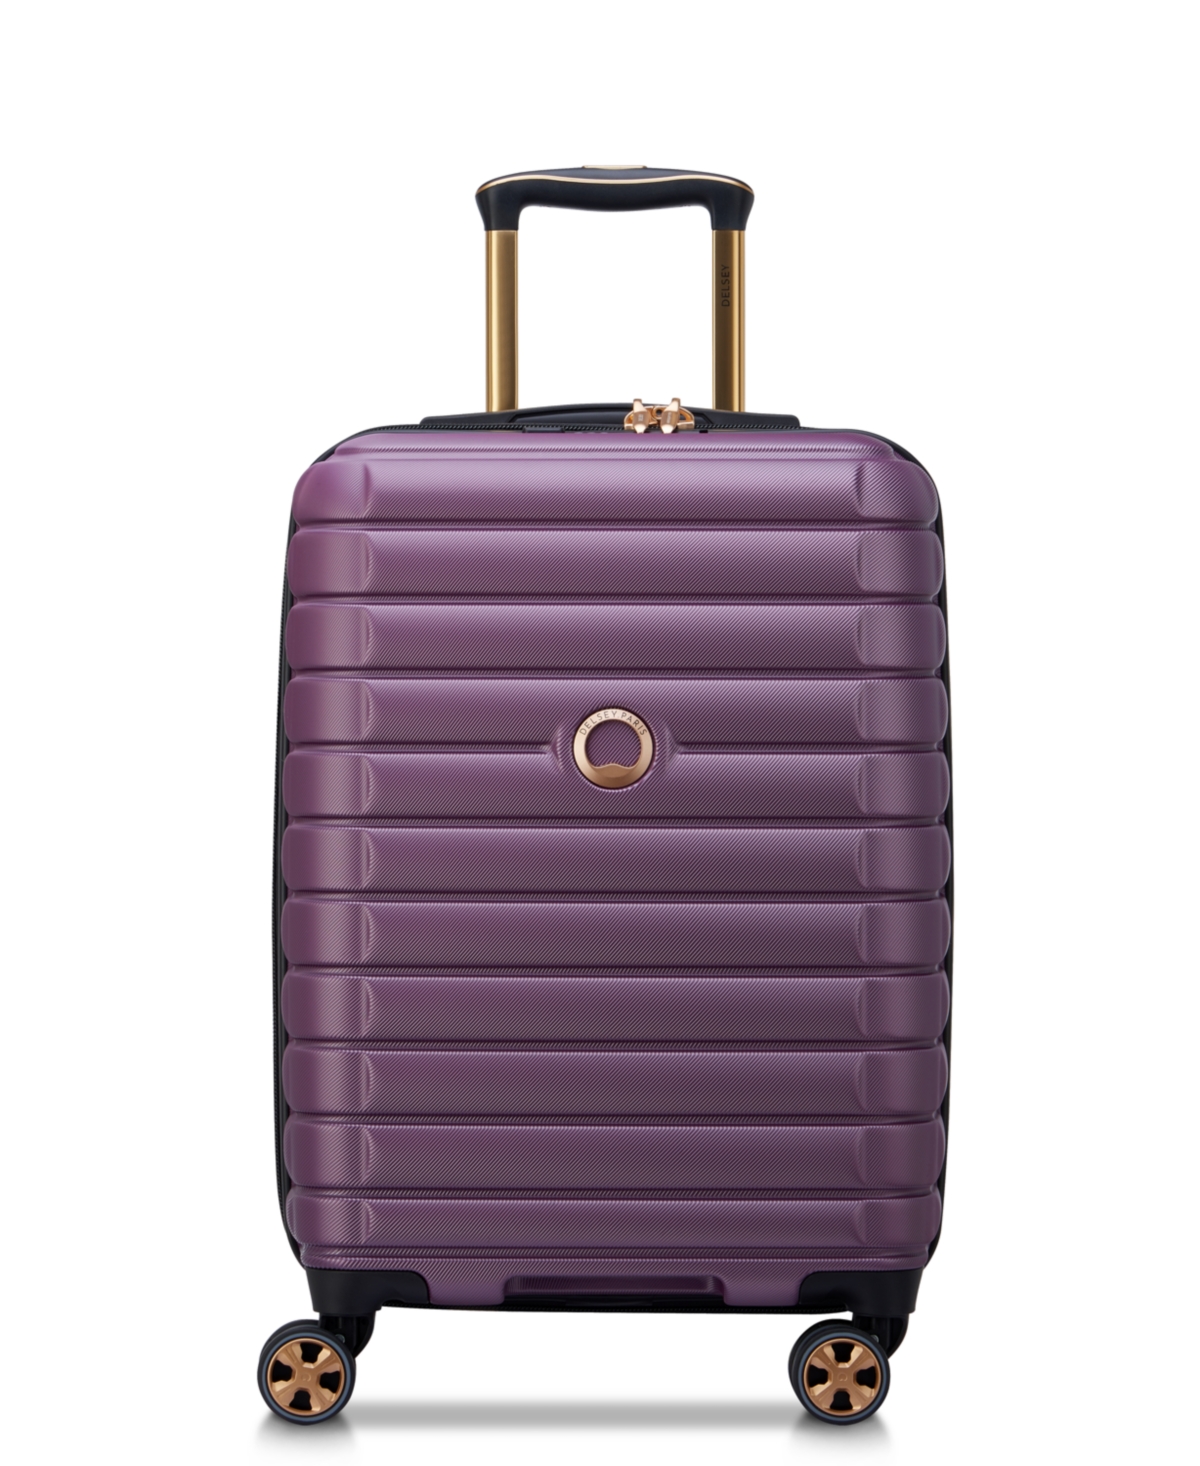 Delsey Shadow 5.0 Expandable 20" Spinner Carry On Luggage In Mauve